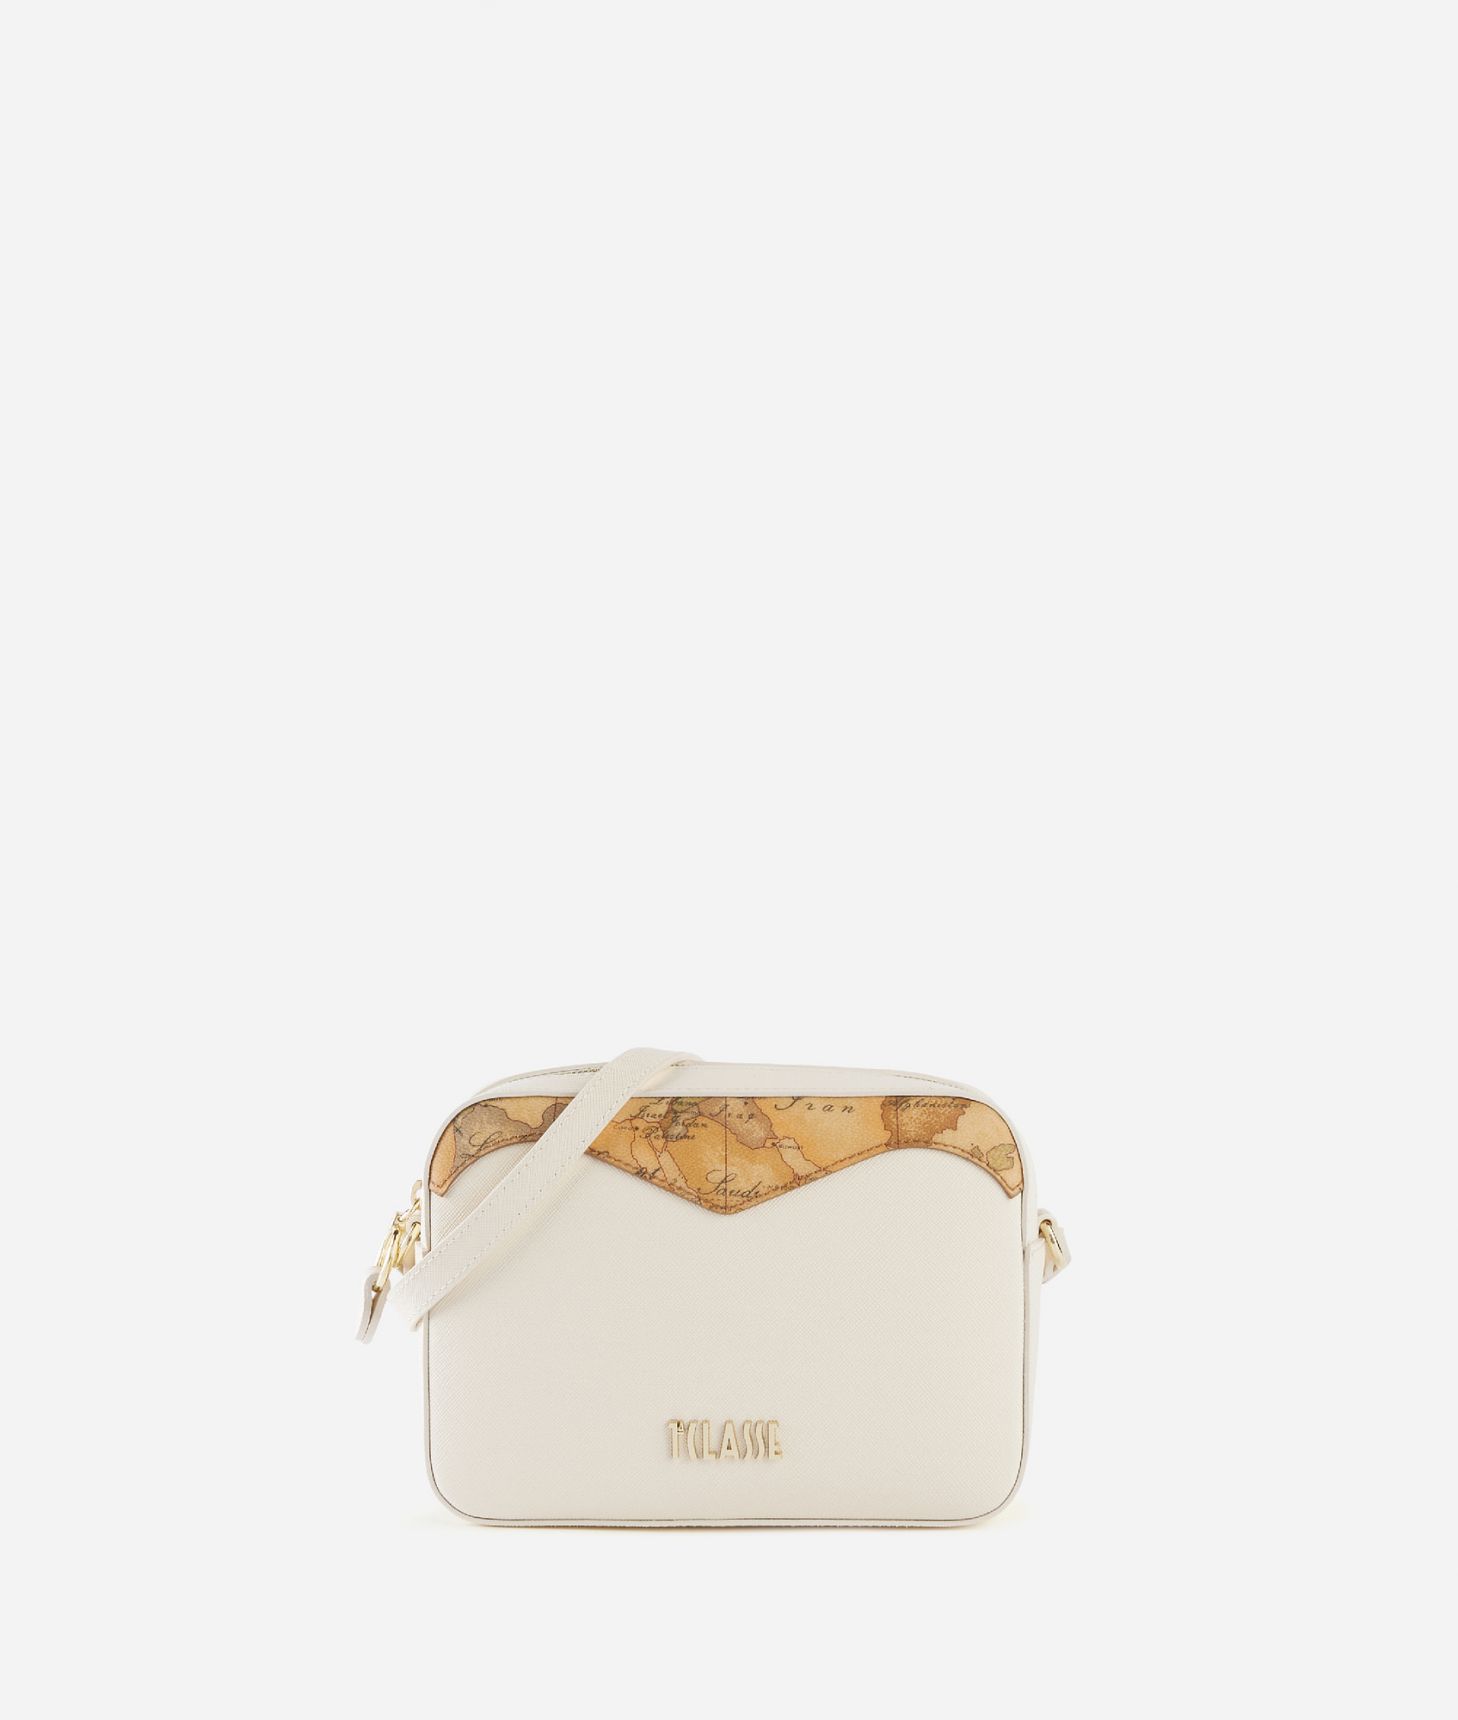 Florida City small reporter bag Ivory,front